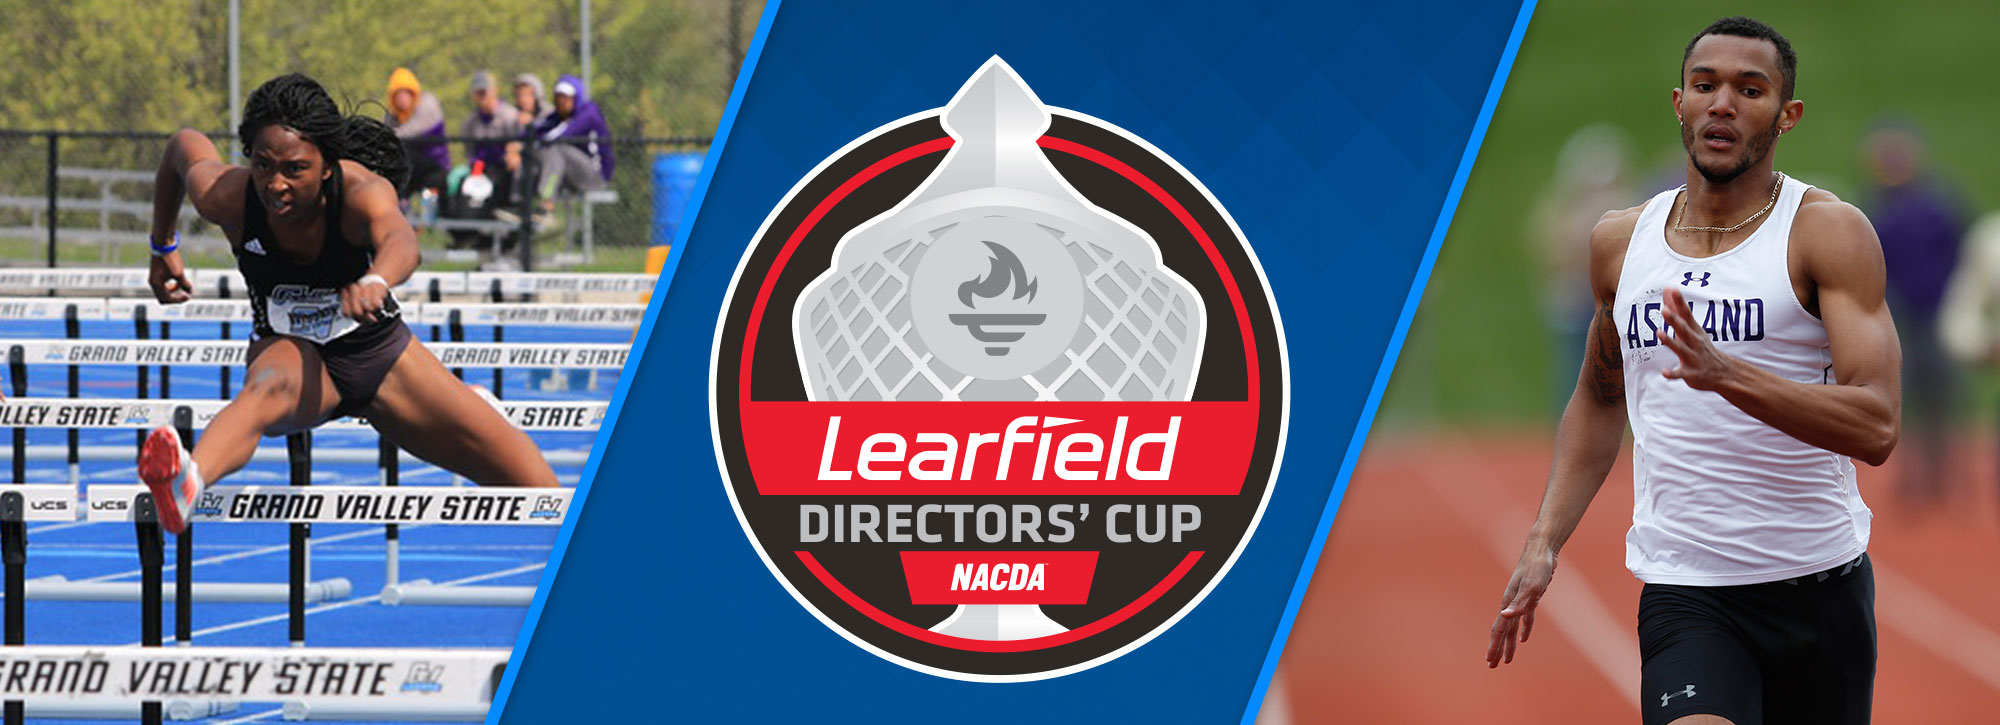 GVSU Finishes Runner-Up in Learfield Sports Directors' Cup Standings; Ashland 12th